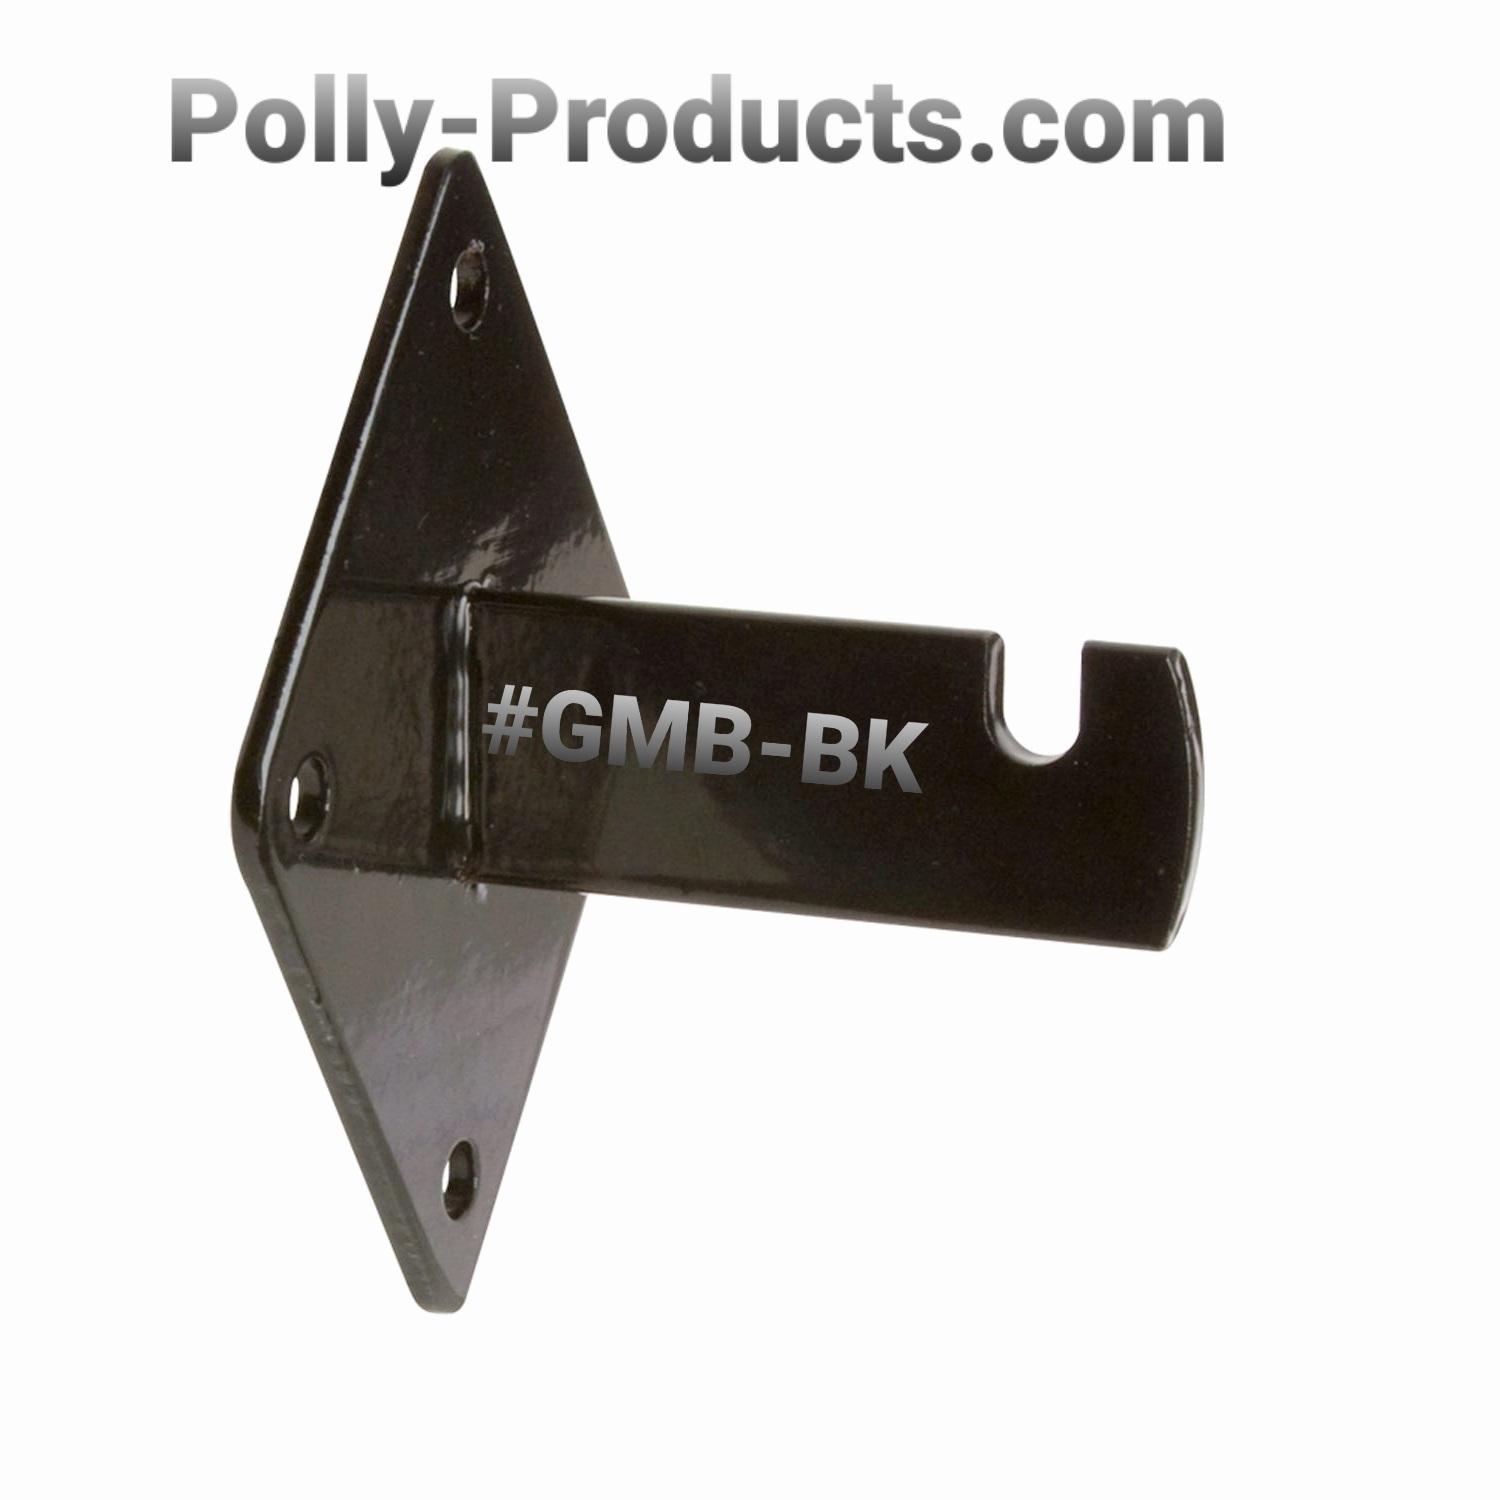 POLLY PRODUCTS POWER FORM tm METALS DIVISION PRODUCT LINE #GMB-BK GRID PANEL MOUNTING BRACKET 